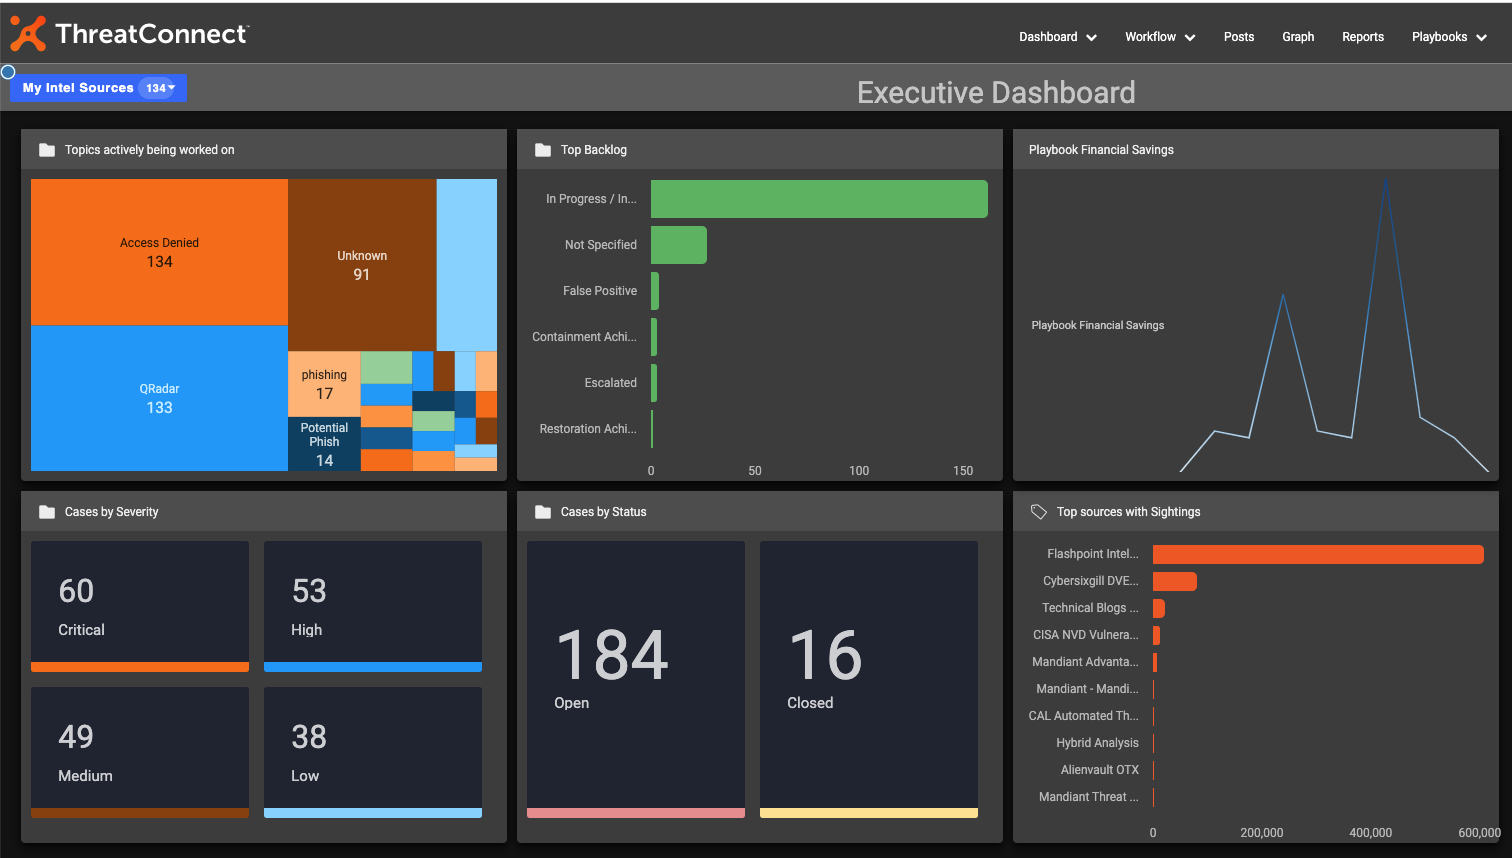 a ThreatConnect executive dashboard shows cases by severity and cases by status